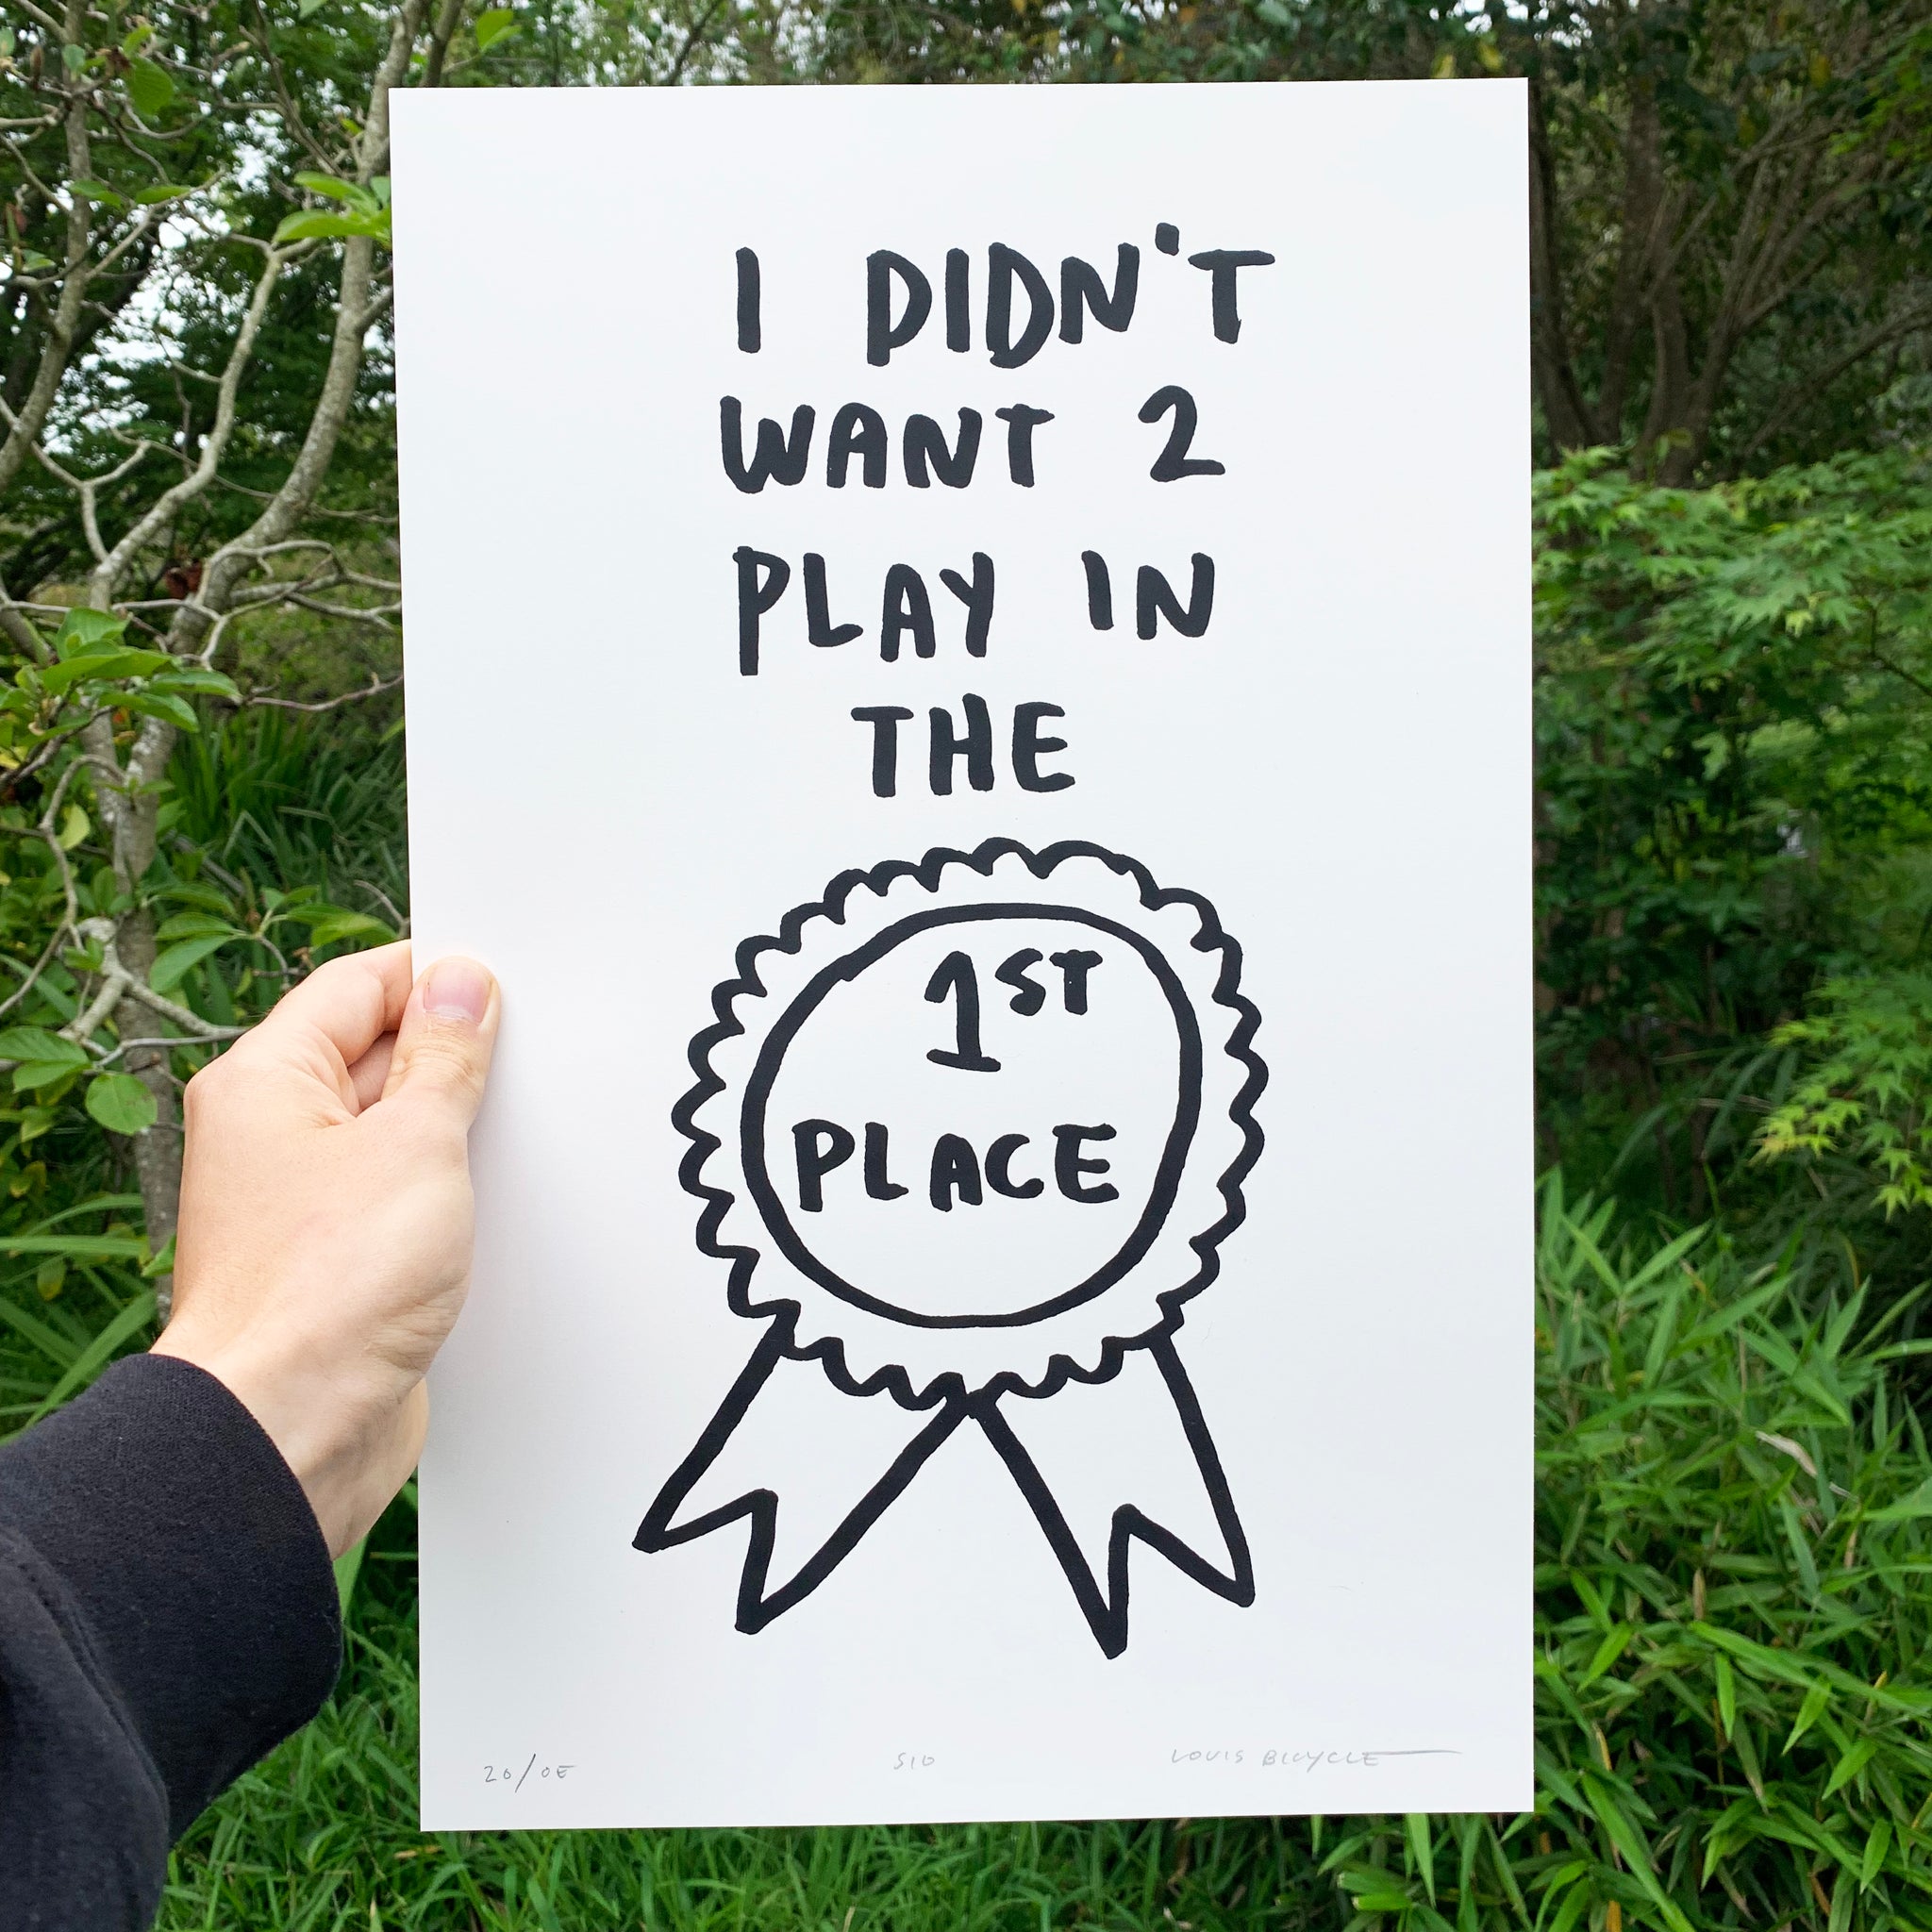 Screen printed poster by artist Louis Bicycle with award ribbon. Text "I didn't want 2 play in the 1st Place."